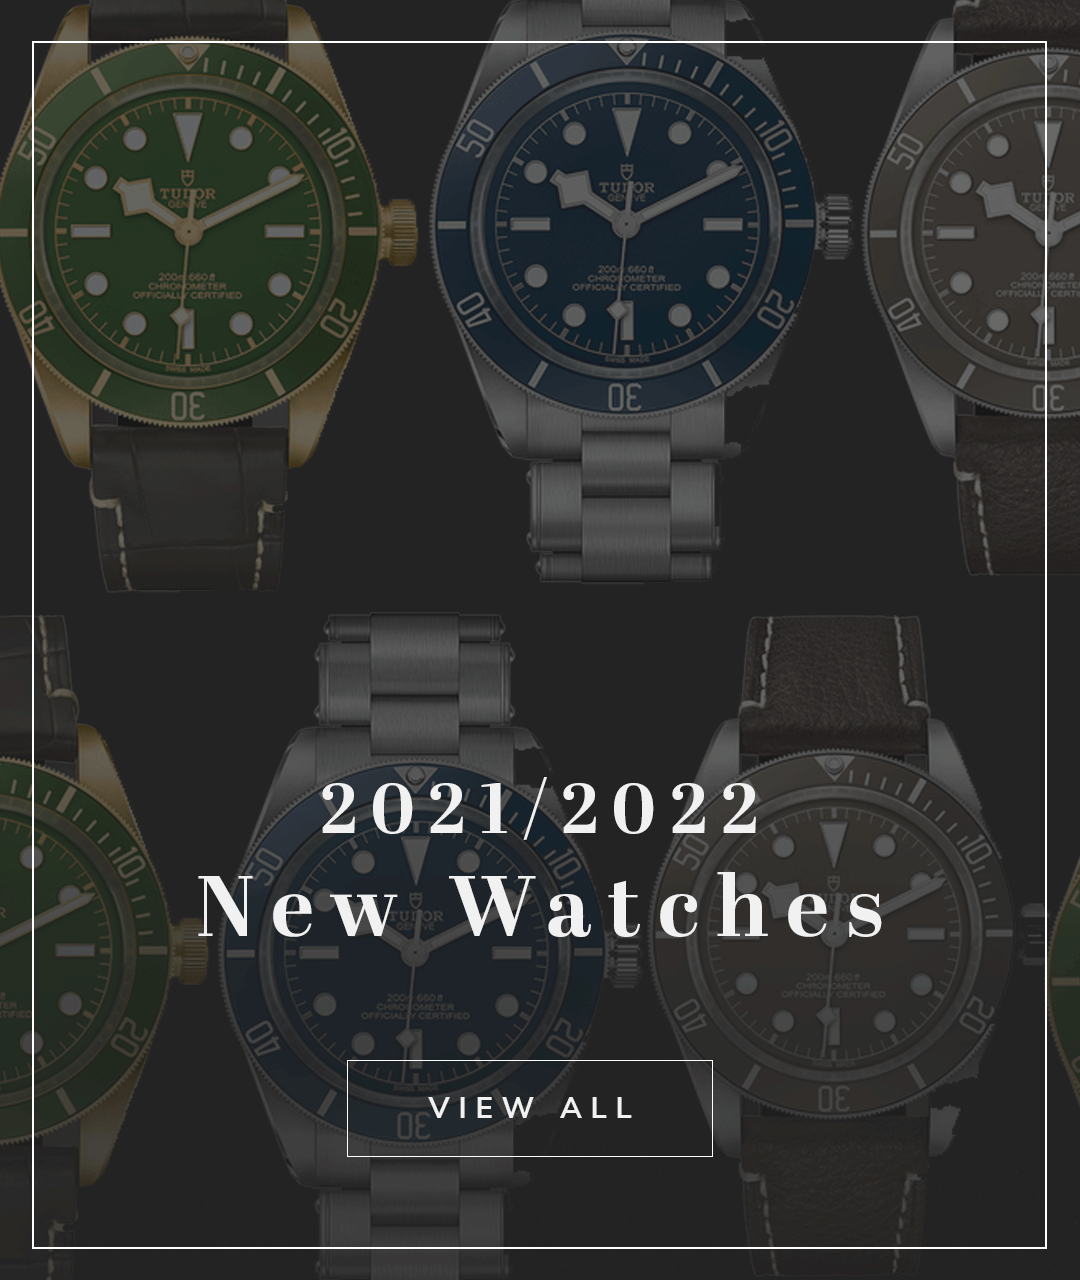 Several tudor watches with text shop now